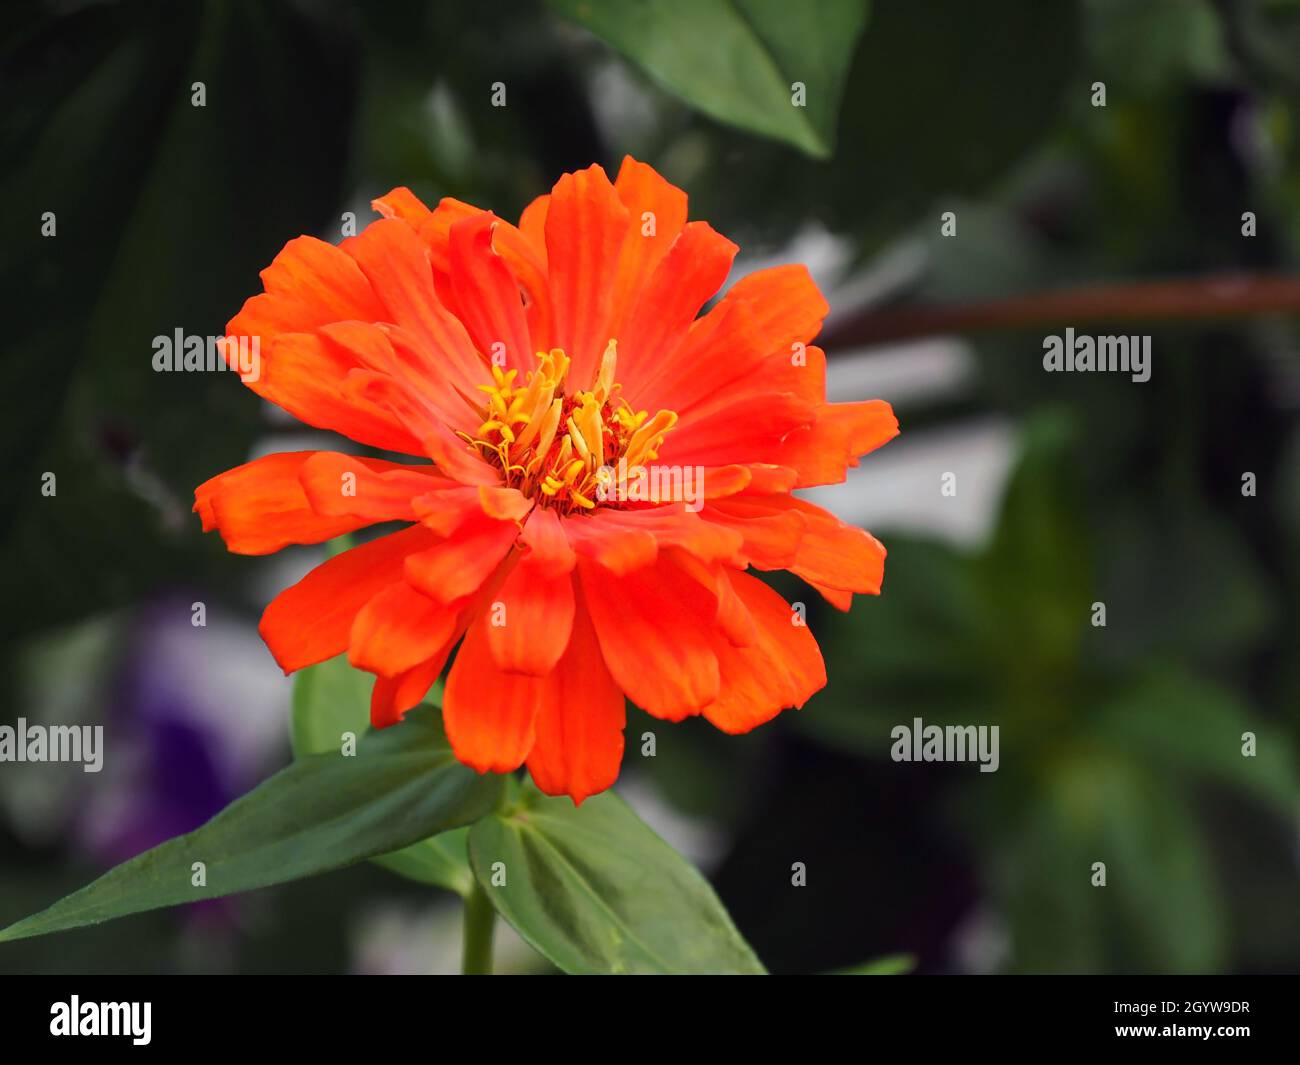 Close-up of the orange flower on a zinnia plant growing in a flowerbed. Stock Photo